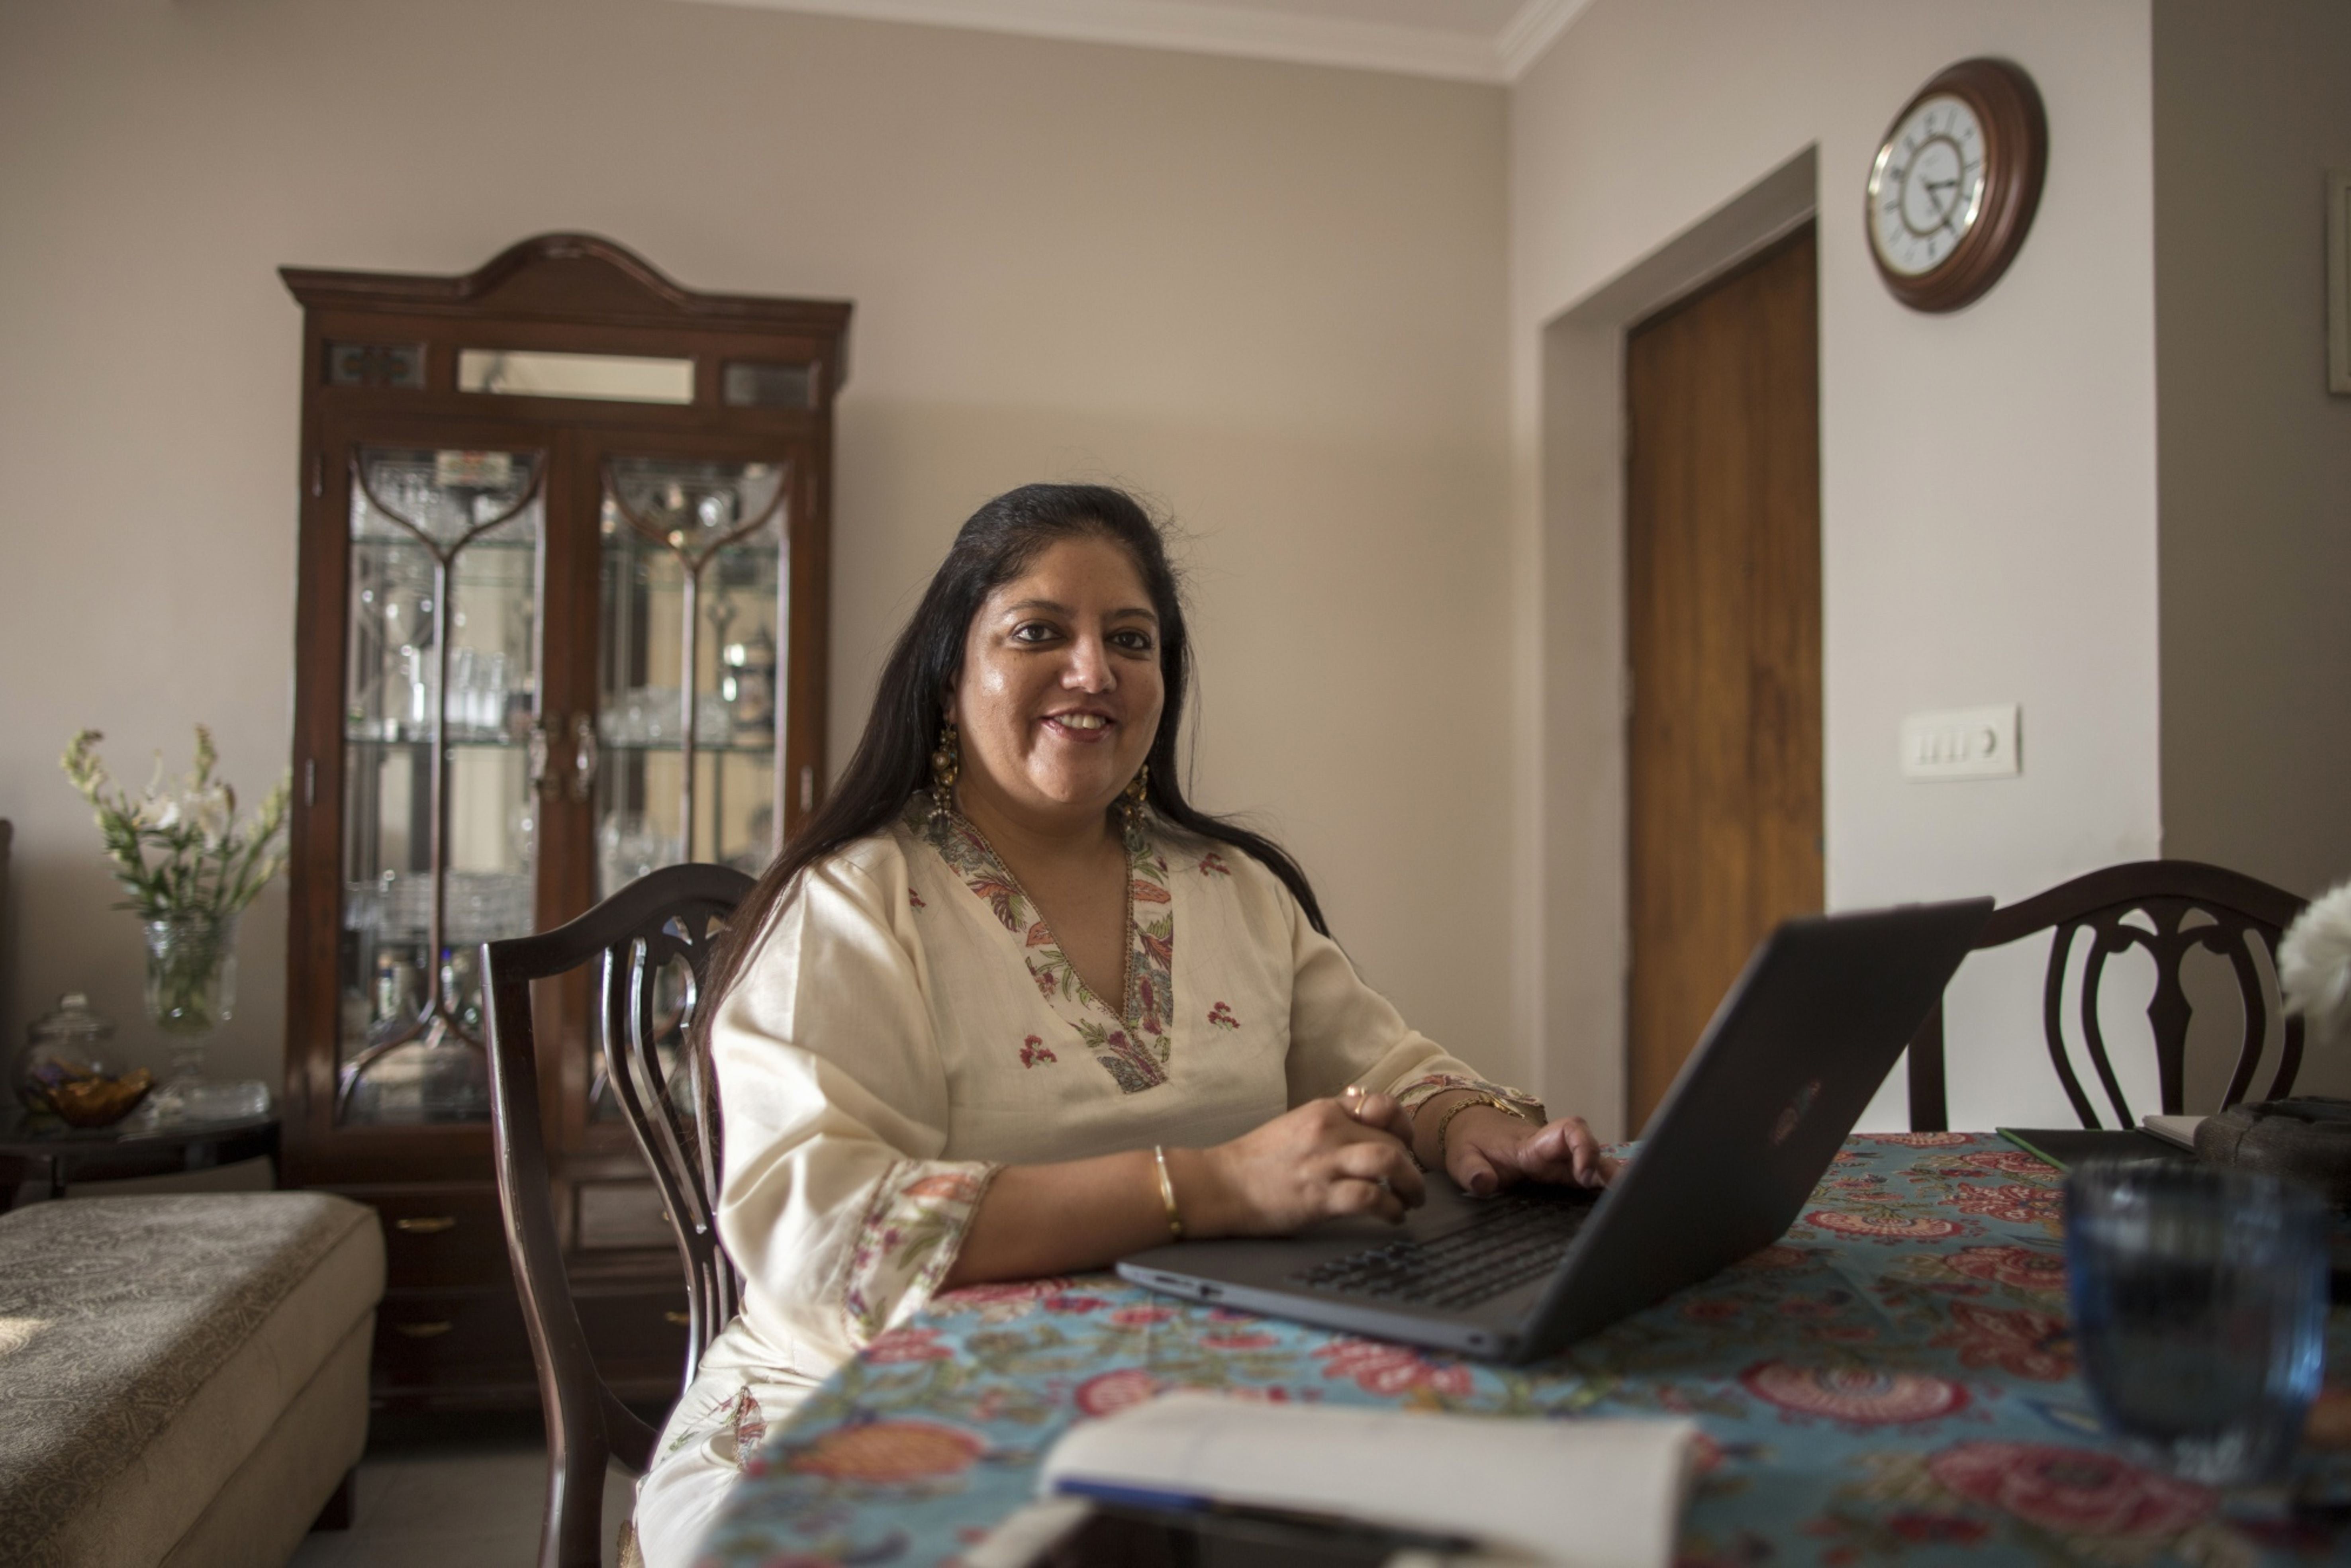 Teena Likhari landed a job working from home and is overseeing a 100-member team in the city of Pune, about 900 miles away